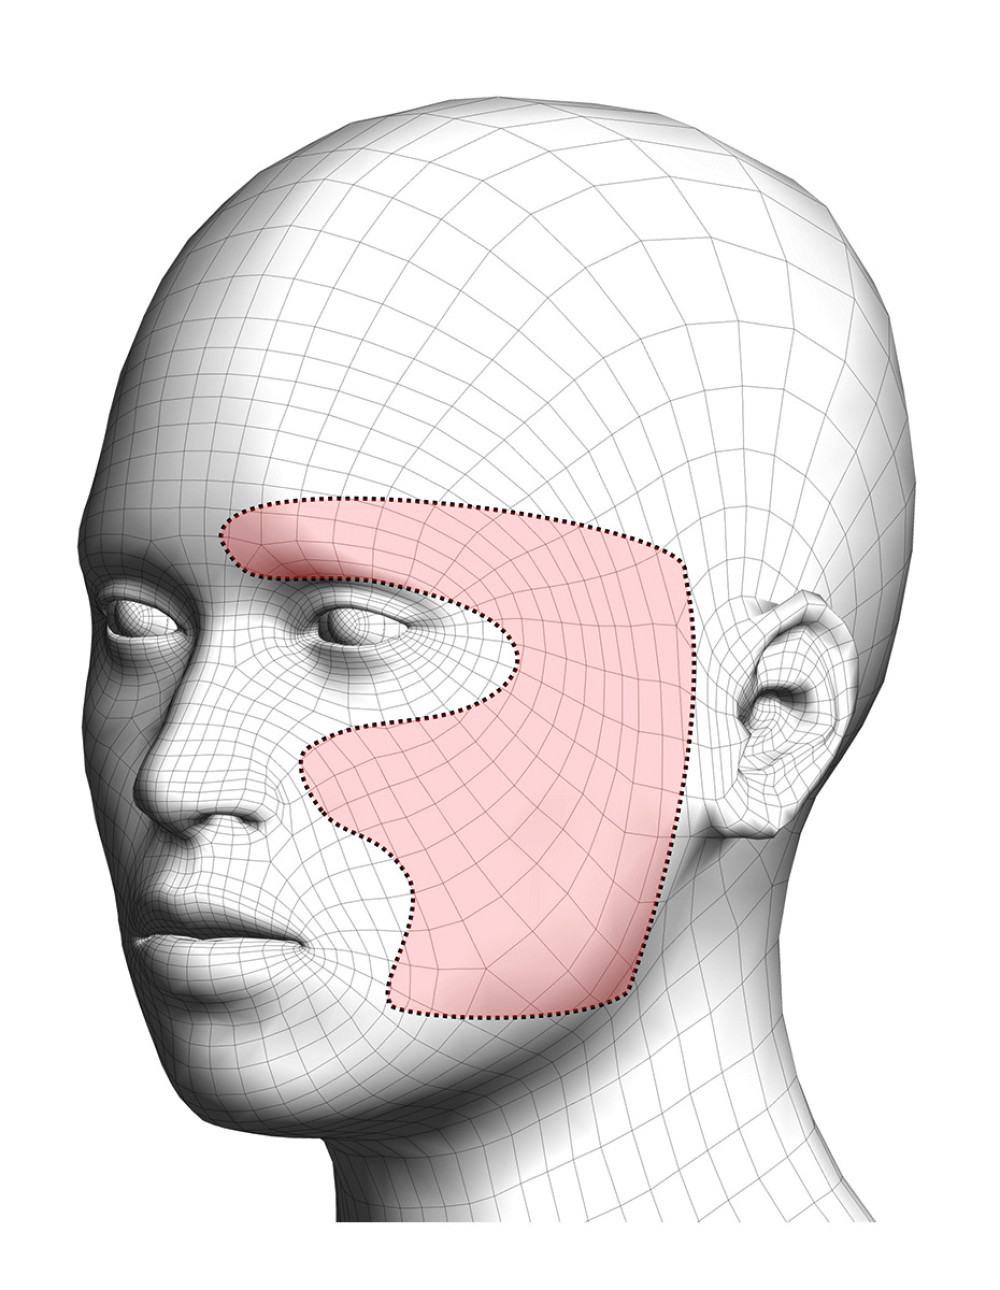 Distribution of the patient’s facial sensory symptoms. The patient noted pain and paresthesia in the highlighted area shown. She also noted a generalized sensation of stiffness and weakness of the facial muscles on the left side of the face. CC0 Public Domain image of face (Piotr Siedlecki; publicdomainpictures. net) modified by RT to illustrate area of symptoms using GIMP GNU Image Manipulation Program version 2.10.30.